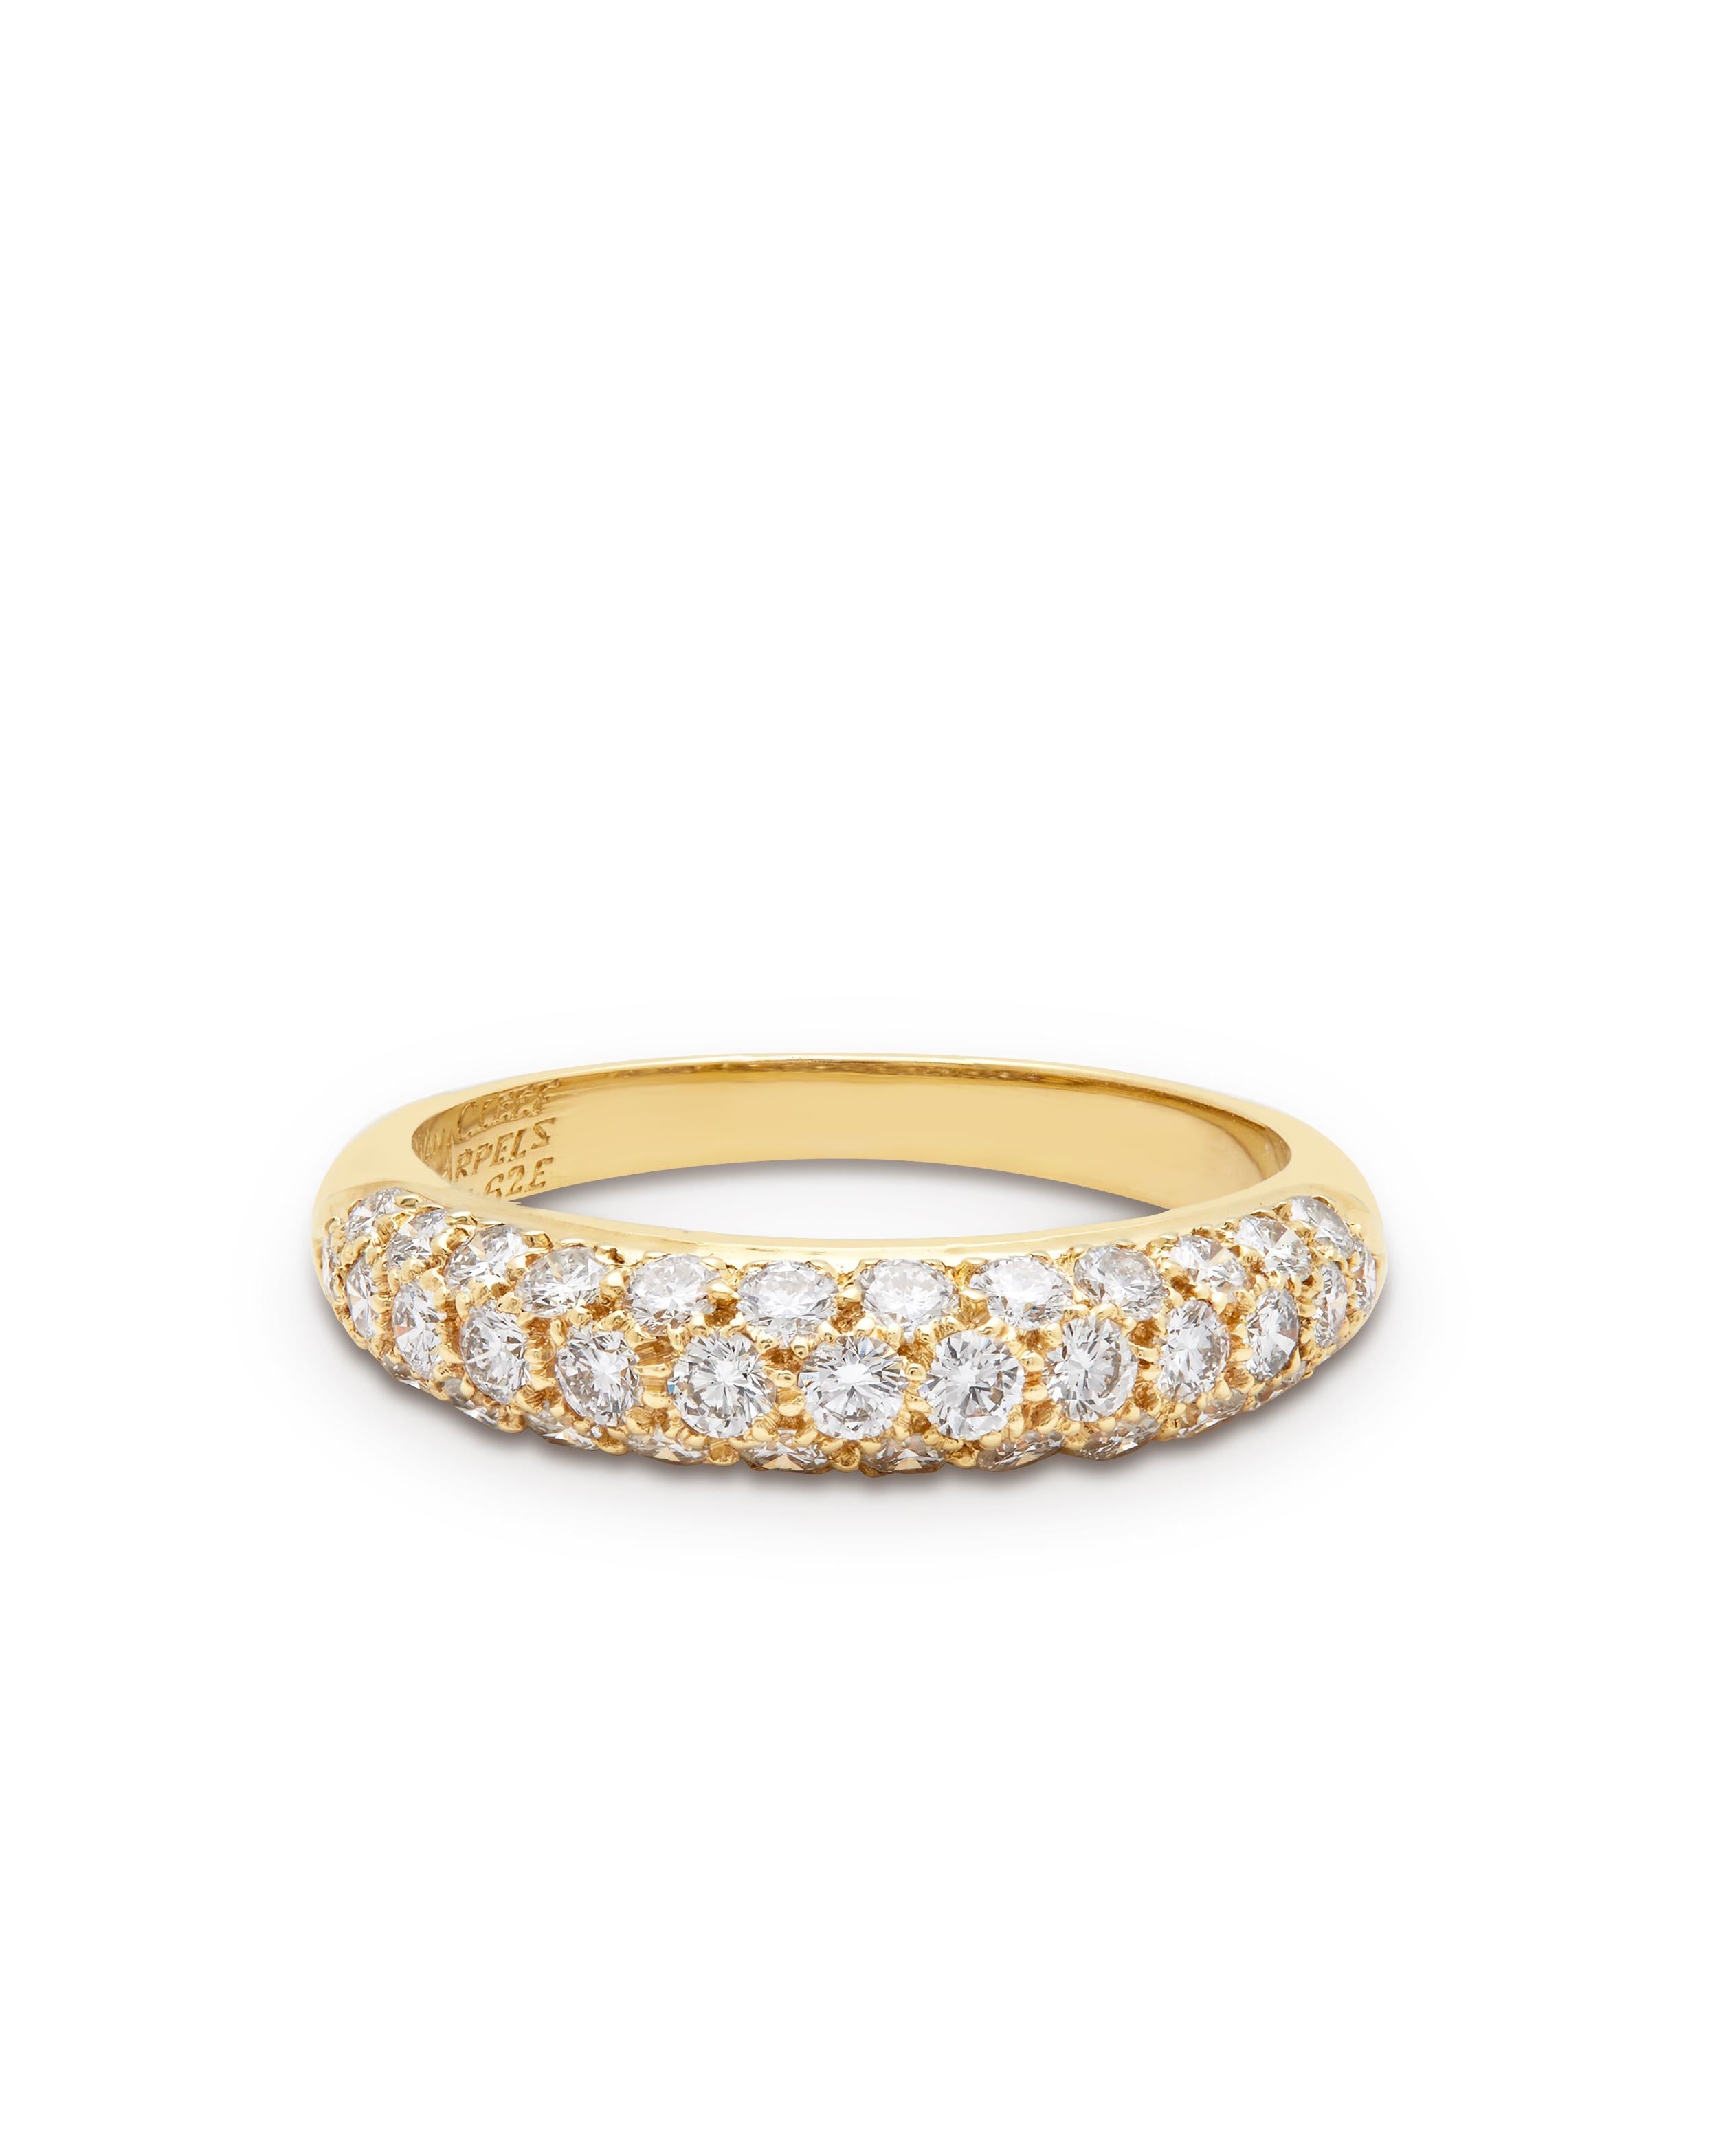 VAN CLEEF & ARPELS, A DIAMOND BOMBE RING

18ct yellow gold, pave set with round brilliant cut diamonds, half set Bombe with 3 rows of round-brilliant cut diamonds.
37 Diamonds individually weighing 0.05ct each, with a total approx diamond weight of